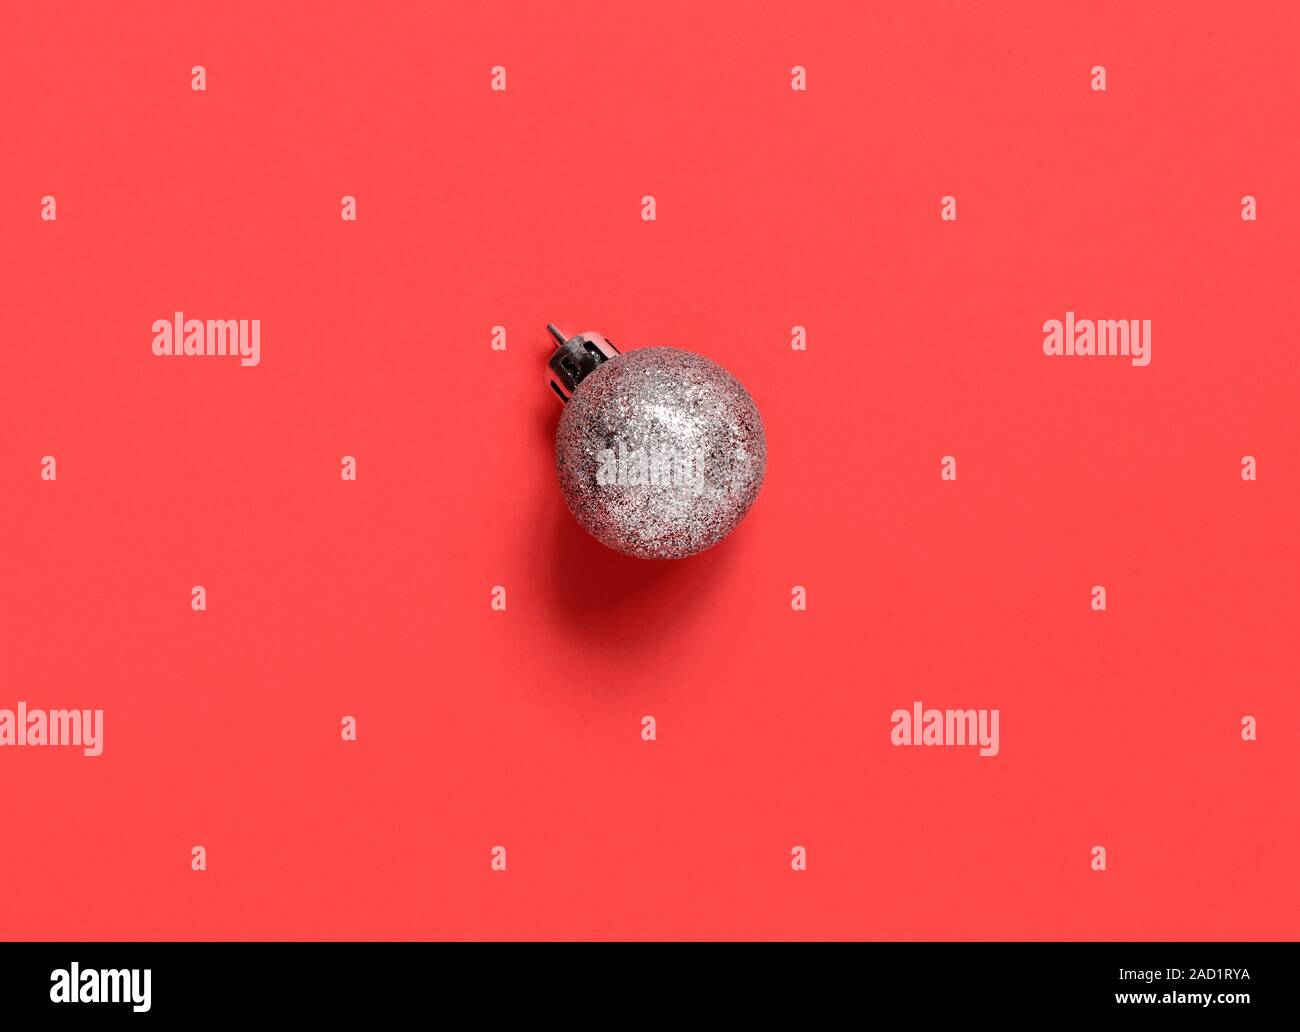 Silver Christmas bauble on a coral red backgroundtop view Stock Photo